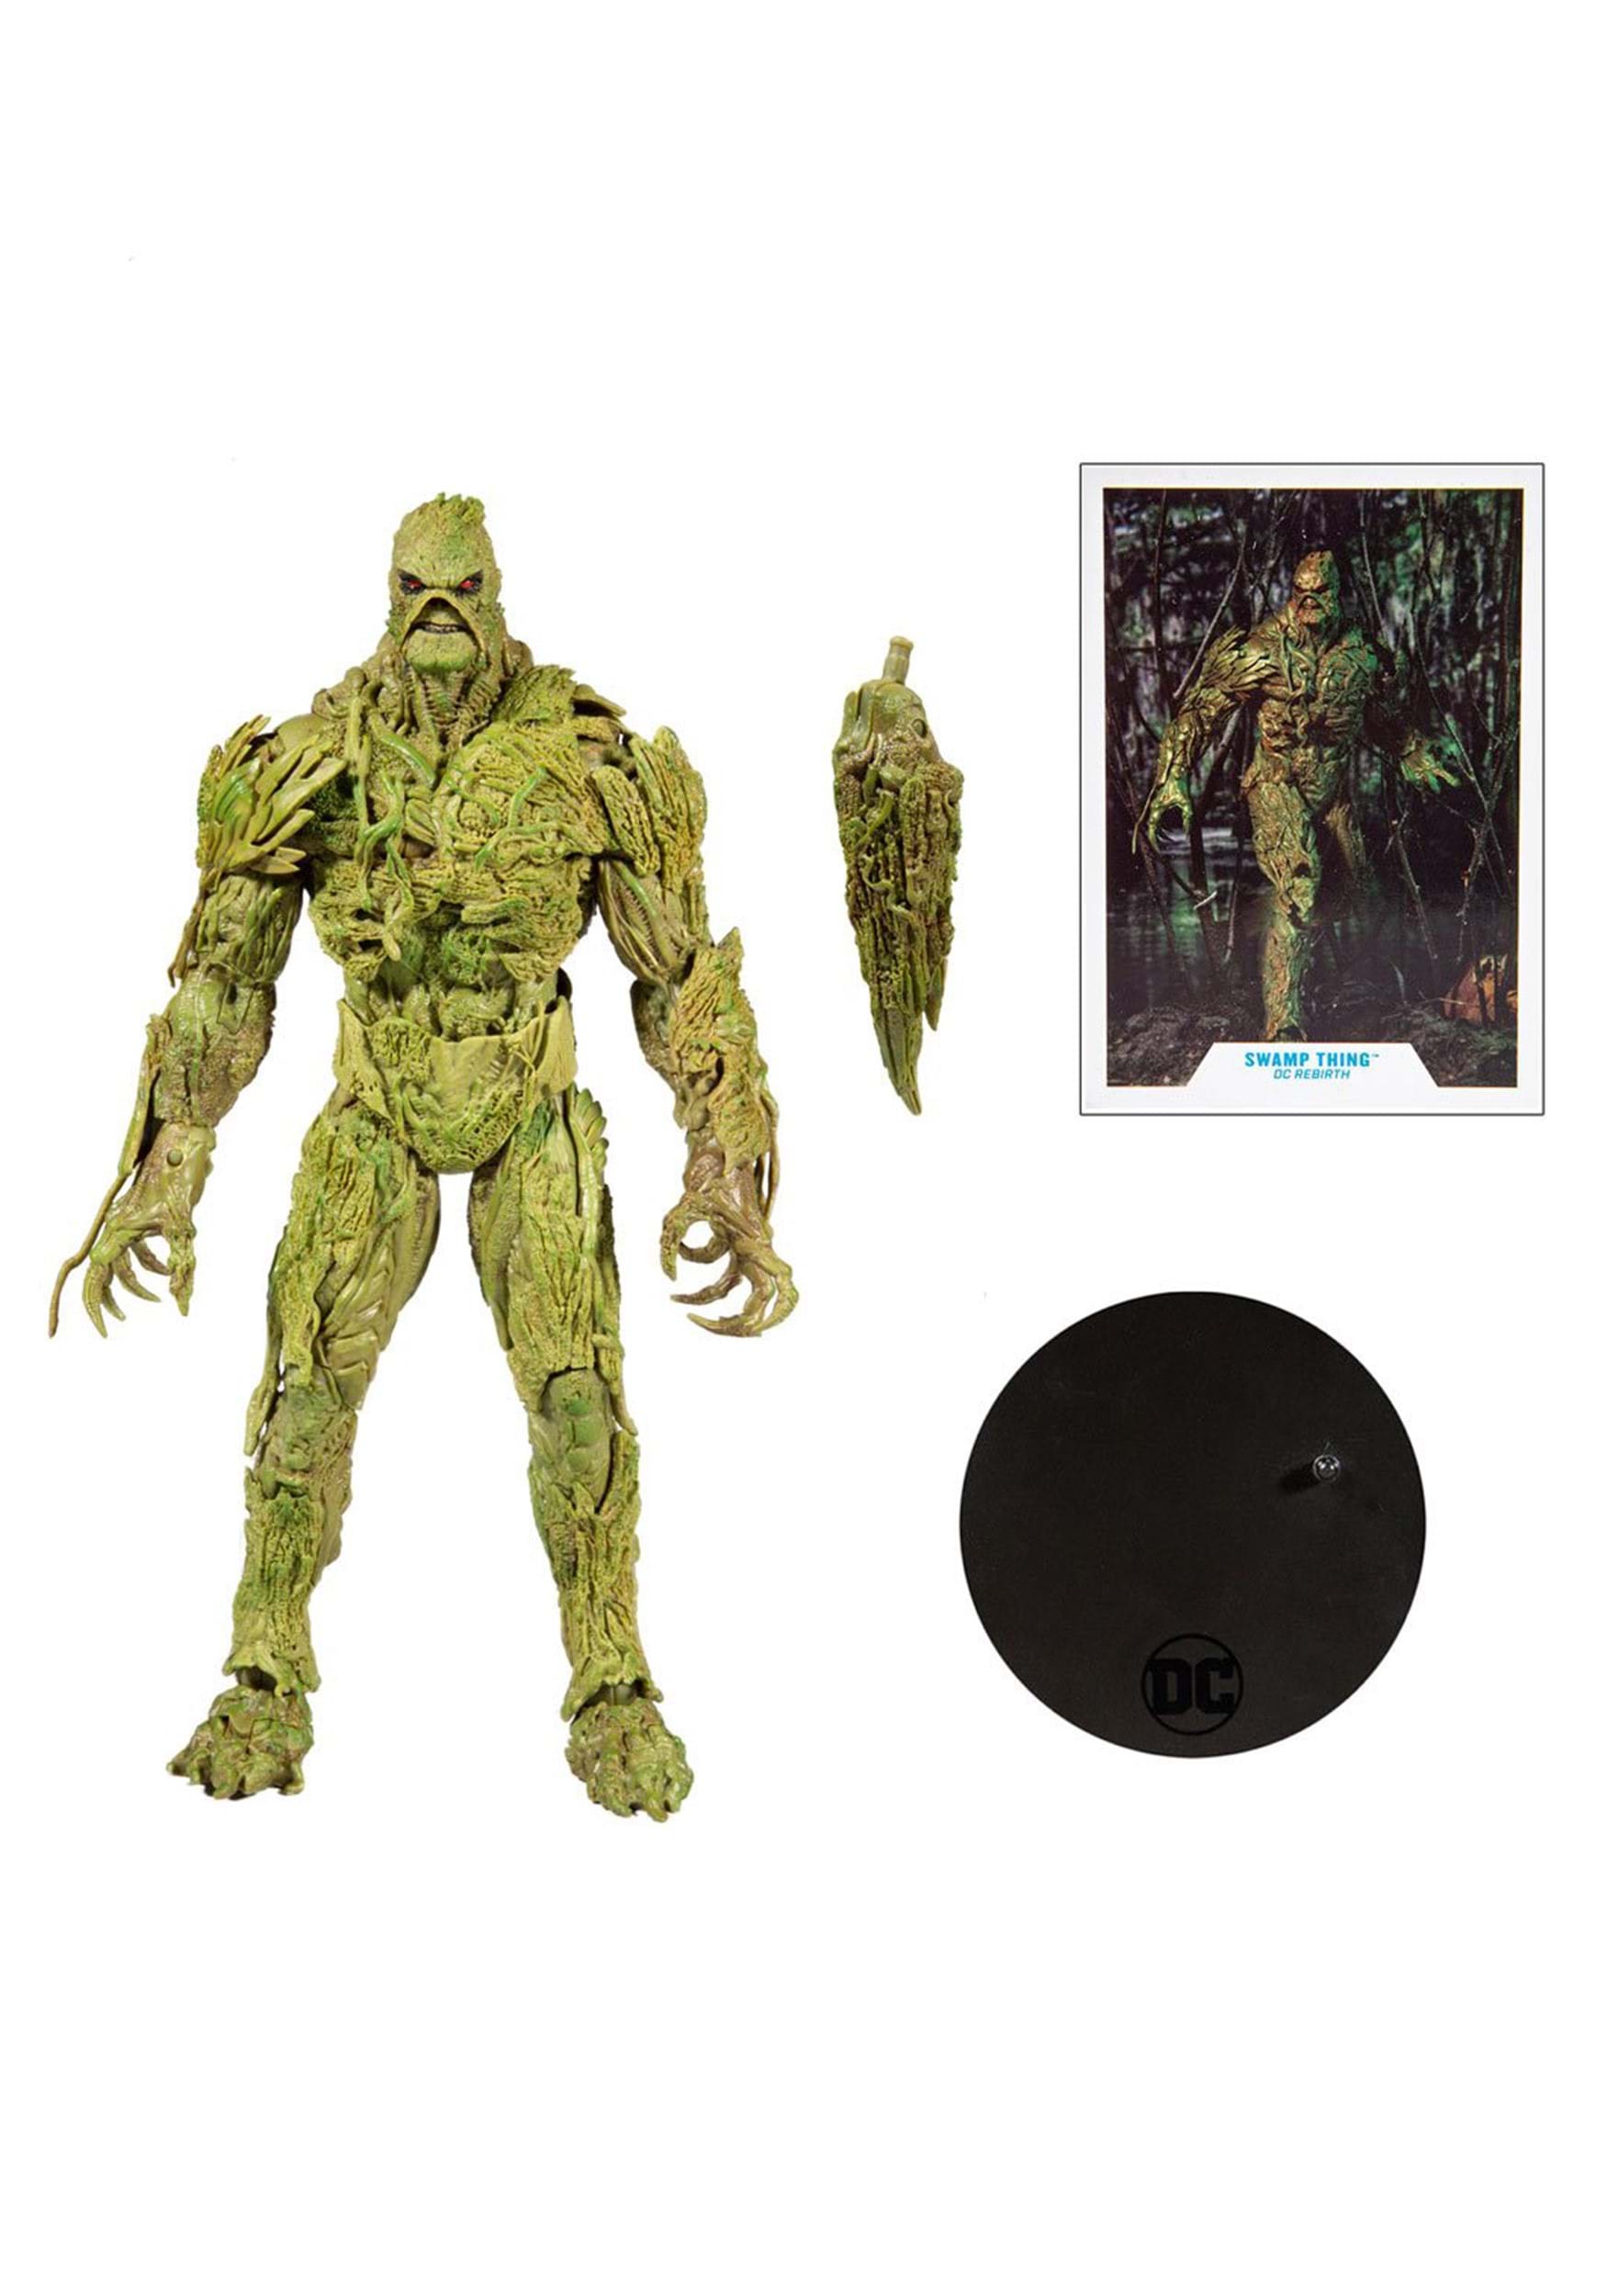 DC Rebirth DC Multiverse Swamp Thing Megafig Action Figure